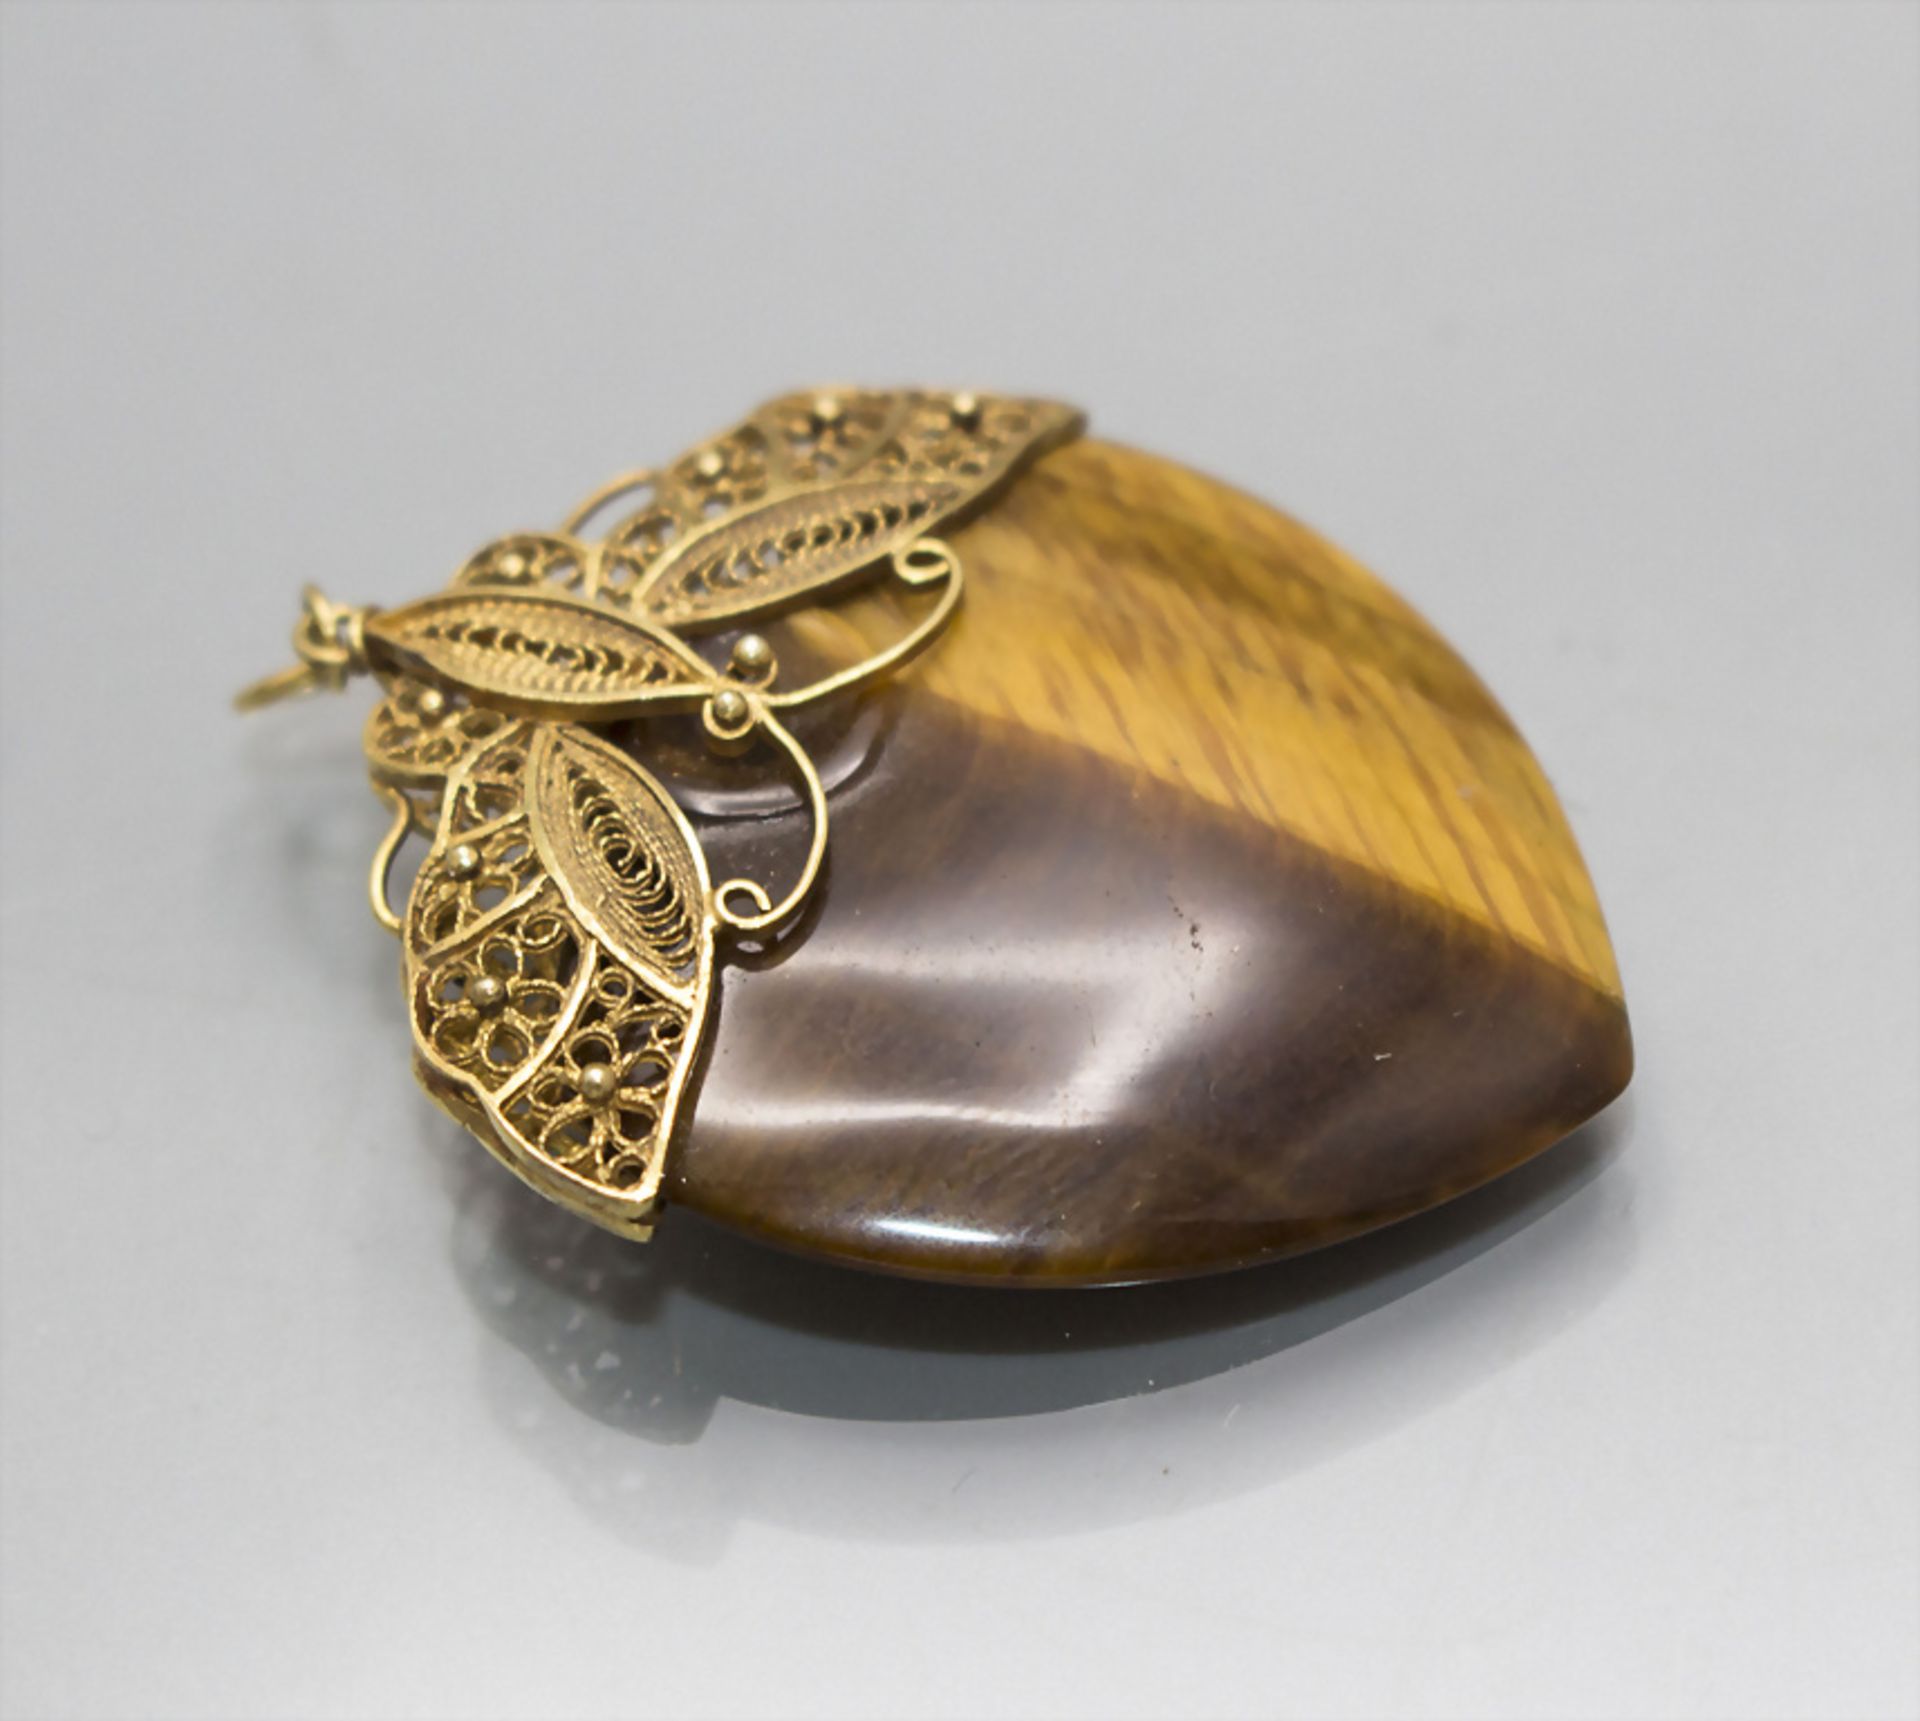 Goldanhänger mit Tigerauge / A 14 ct gold pendant with tiger's eye - Image 2 of 2